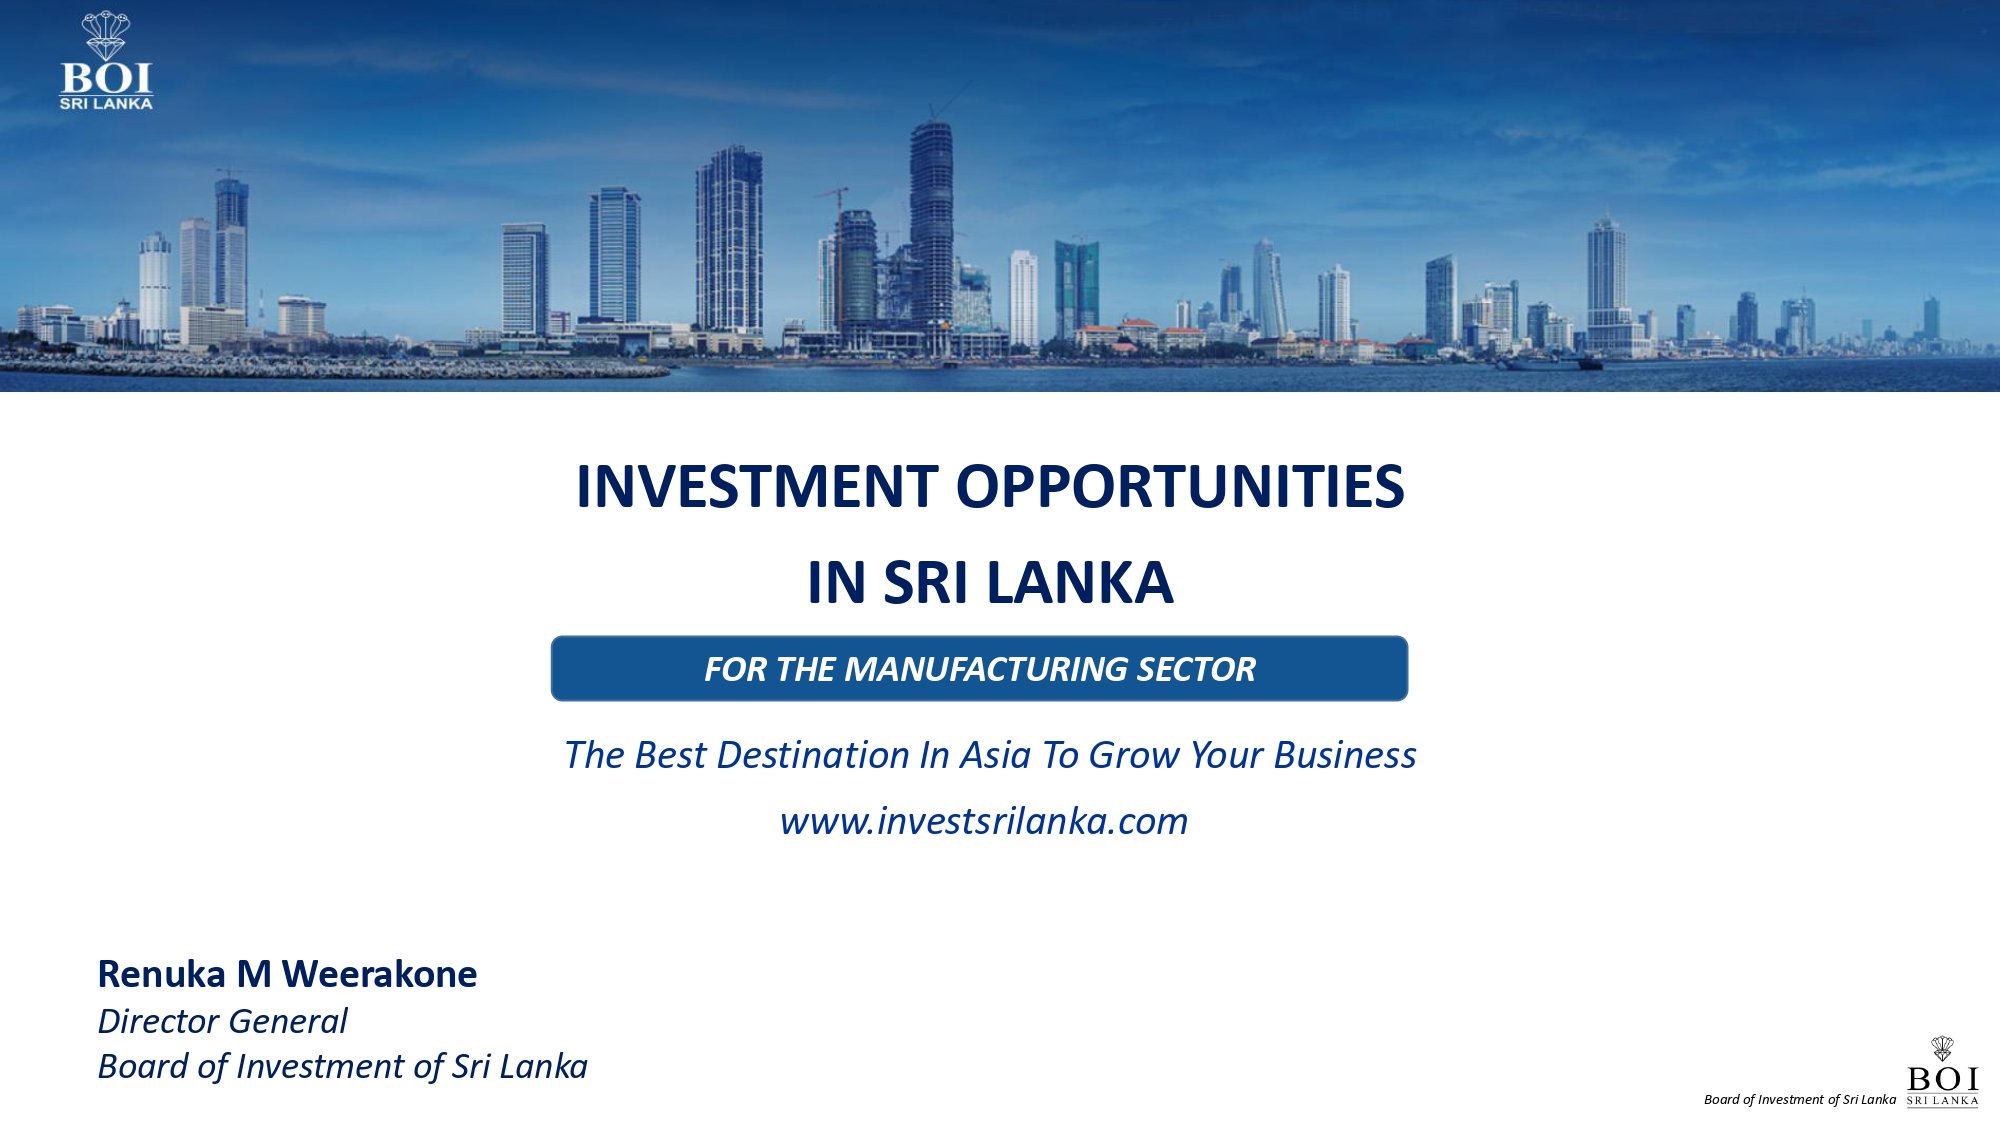 Investment Opportunities in Sri Lanka for the Manufacturing Sector